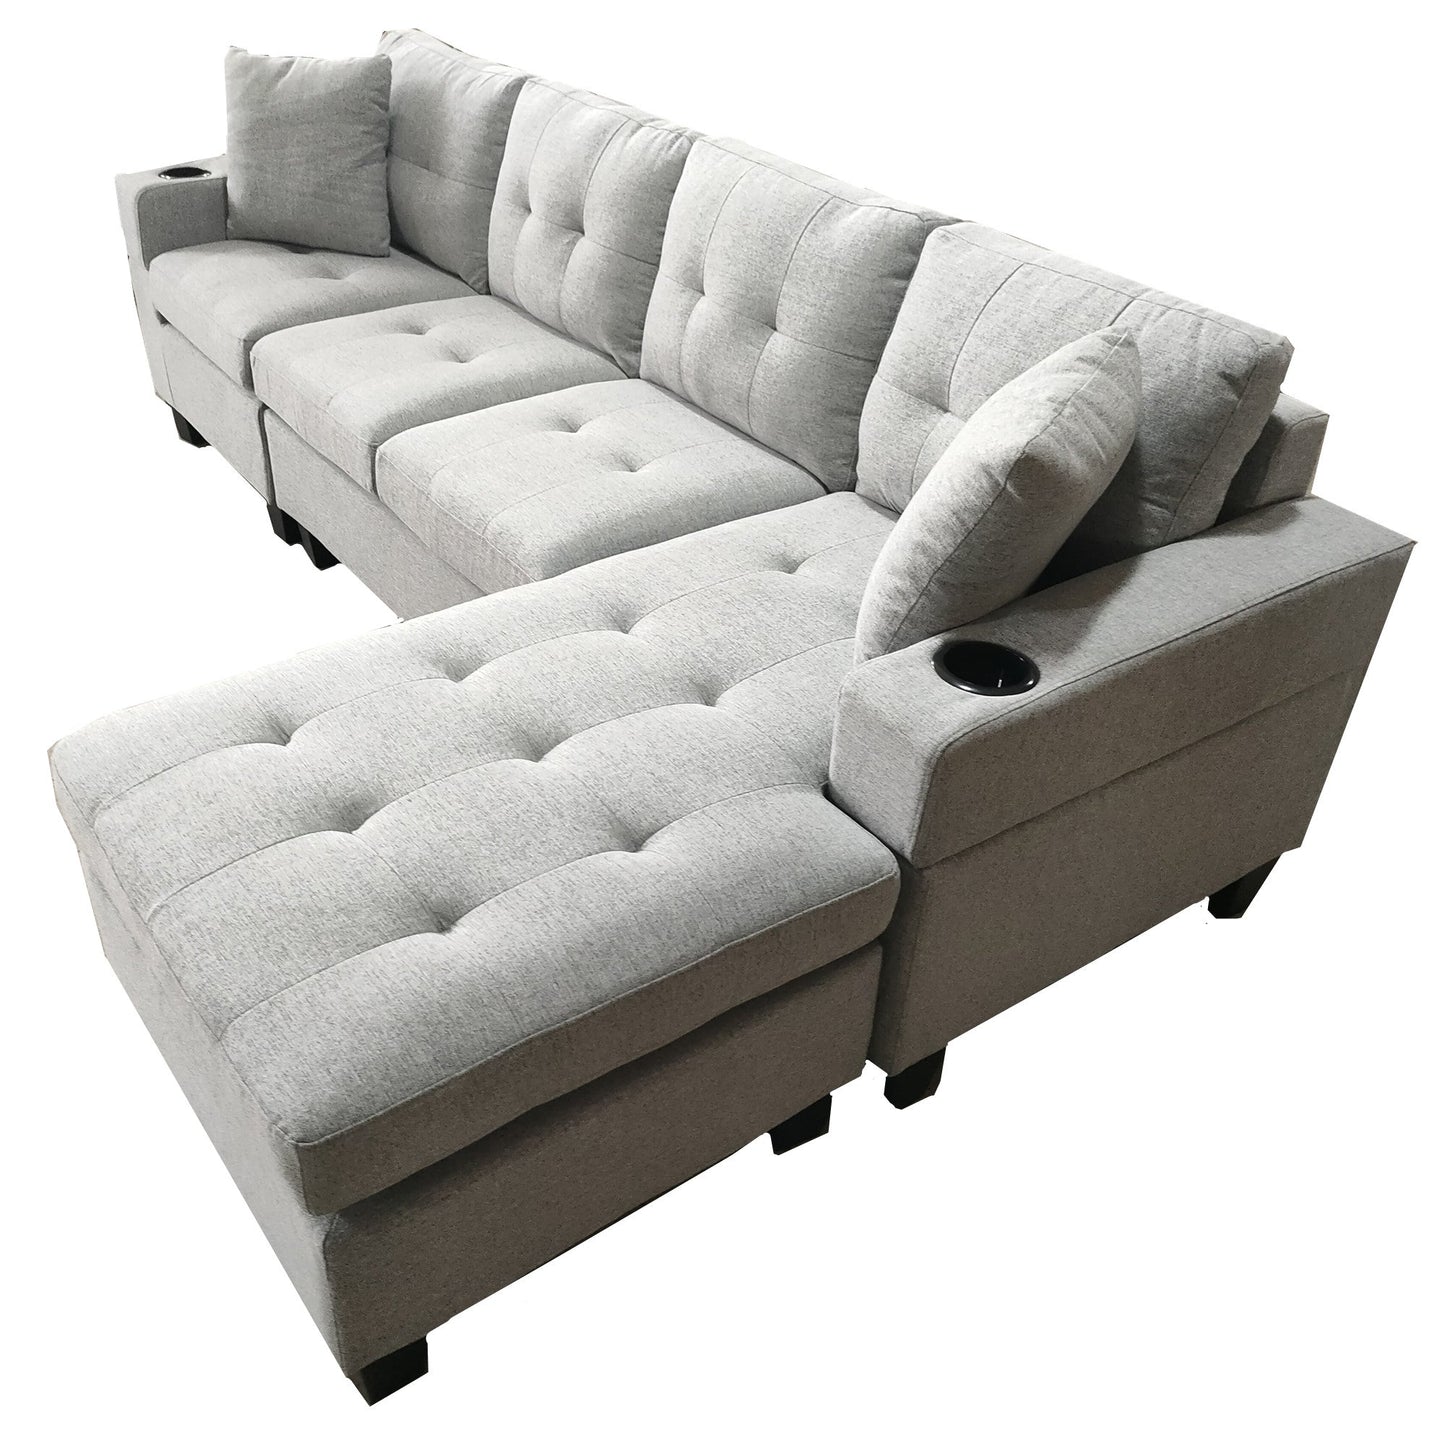 MONTANA REVERSIBLE SOFA COUCH SUITE MODULAR CORNER 4 SEATER SET SECTIONAL - LIGH